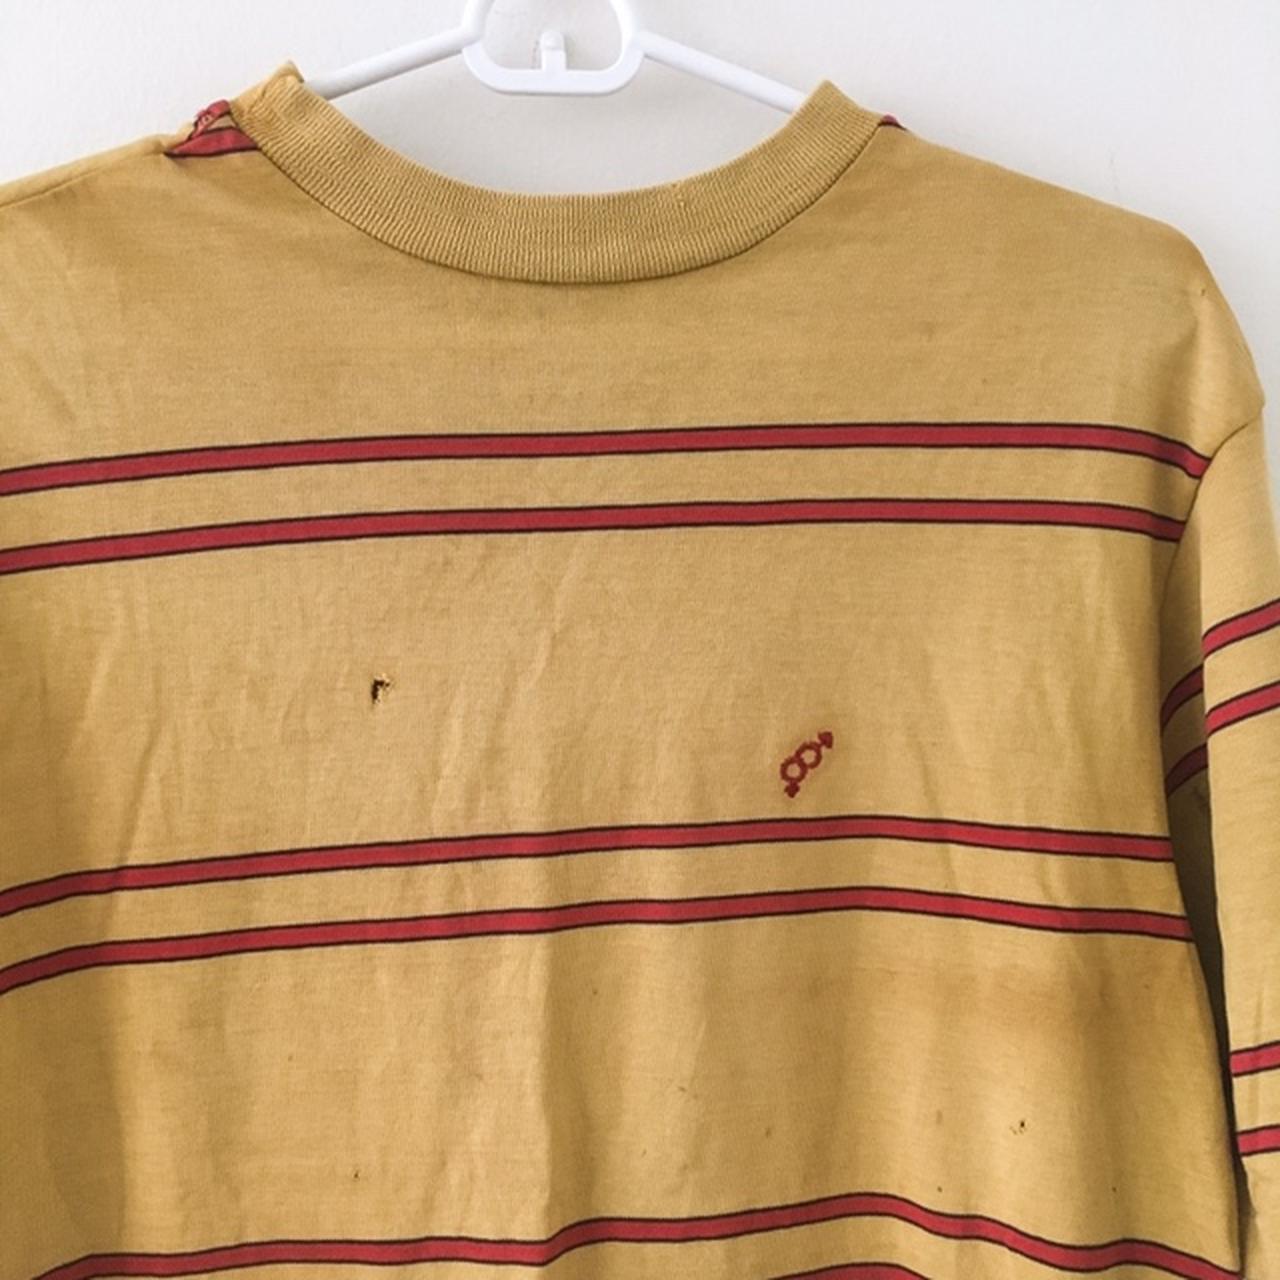 Product Image 2 - 🐝 men’s vintage striped Tee